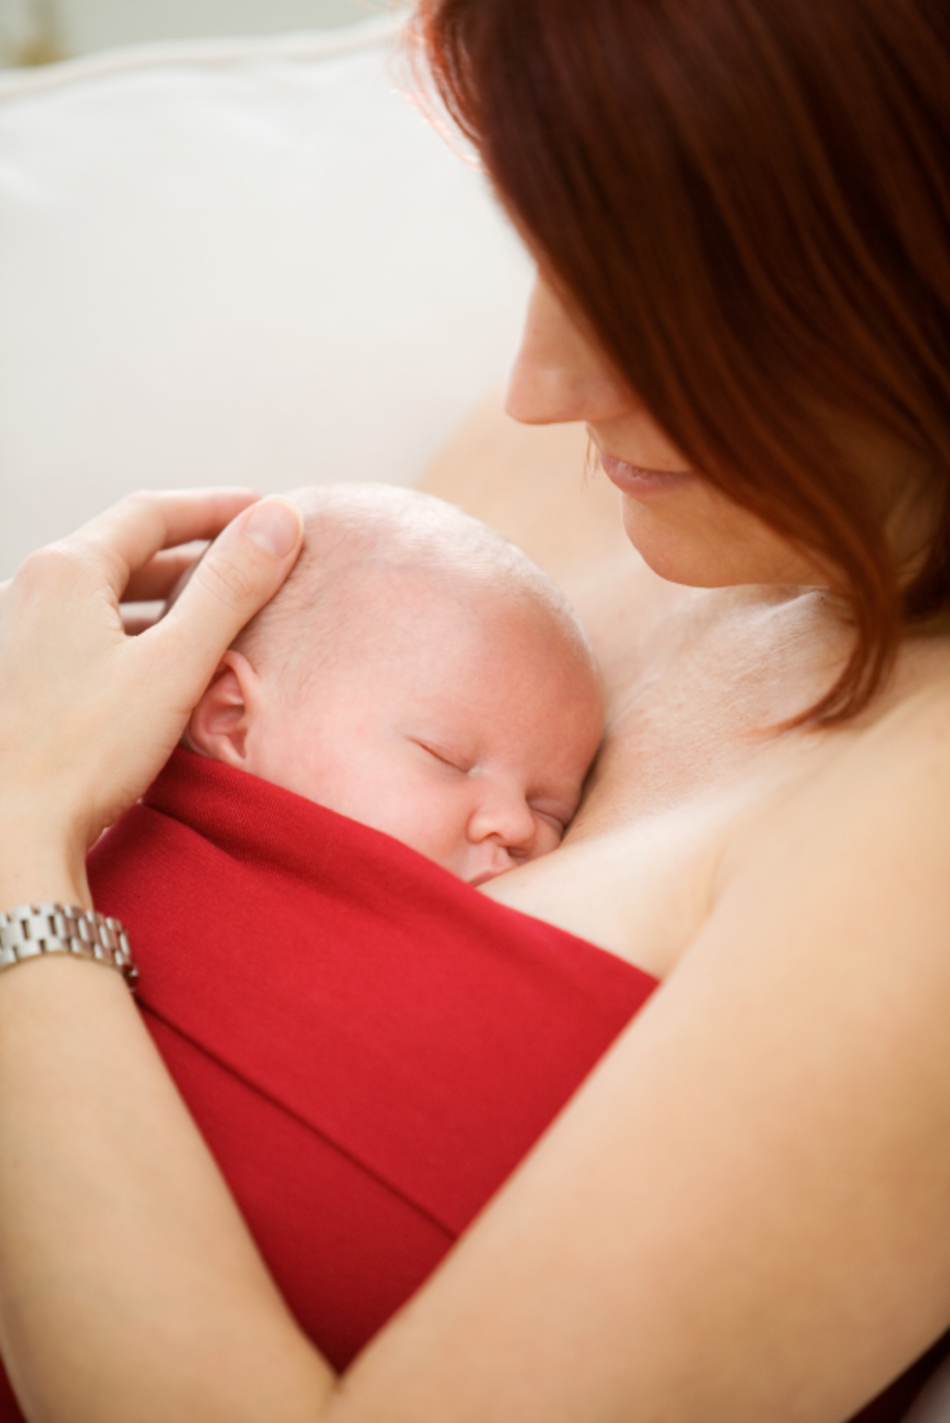 The Importance of Skin-to-Skin Contact Between Mom and Baby